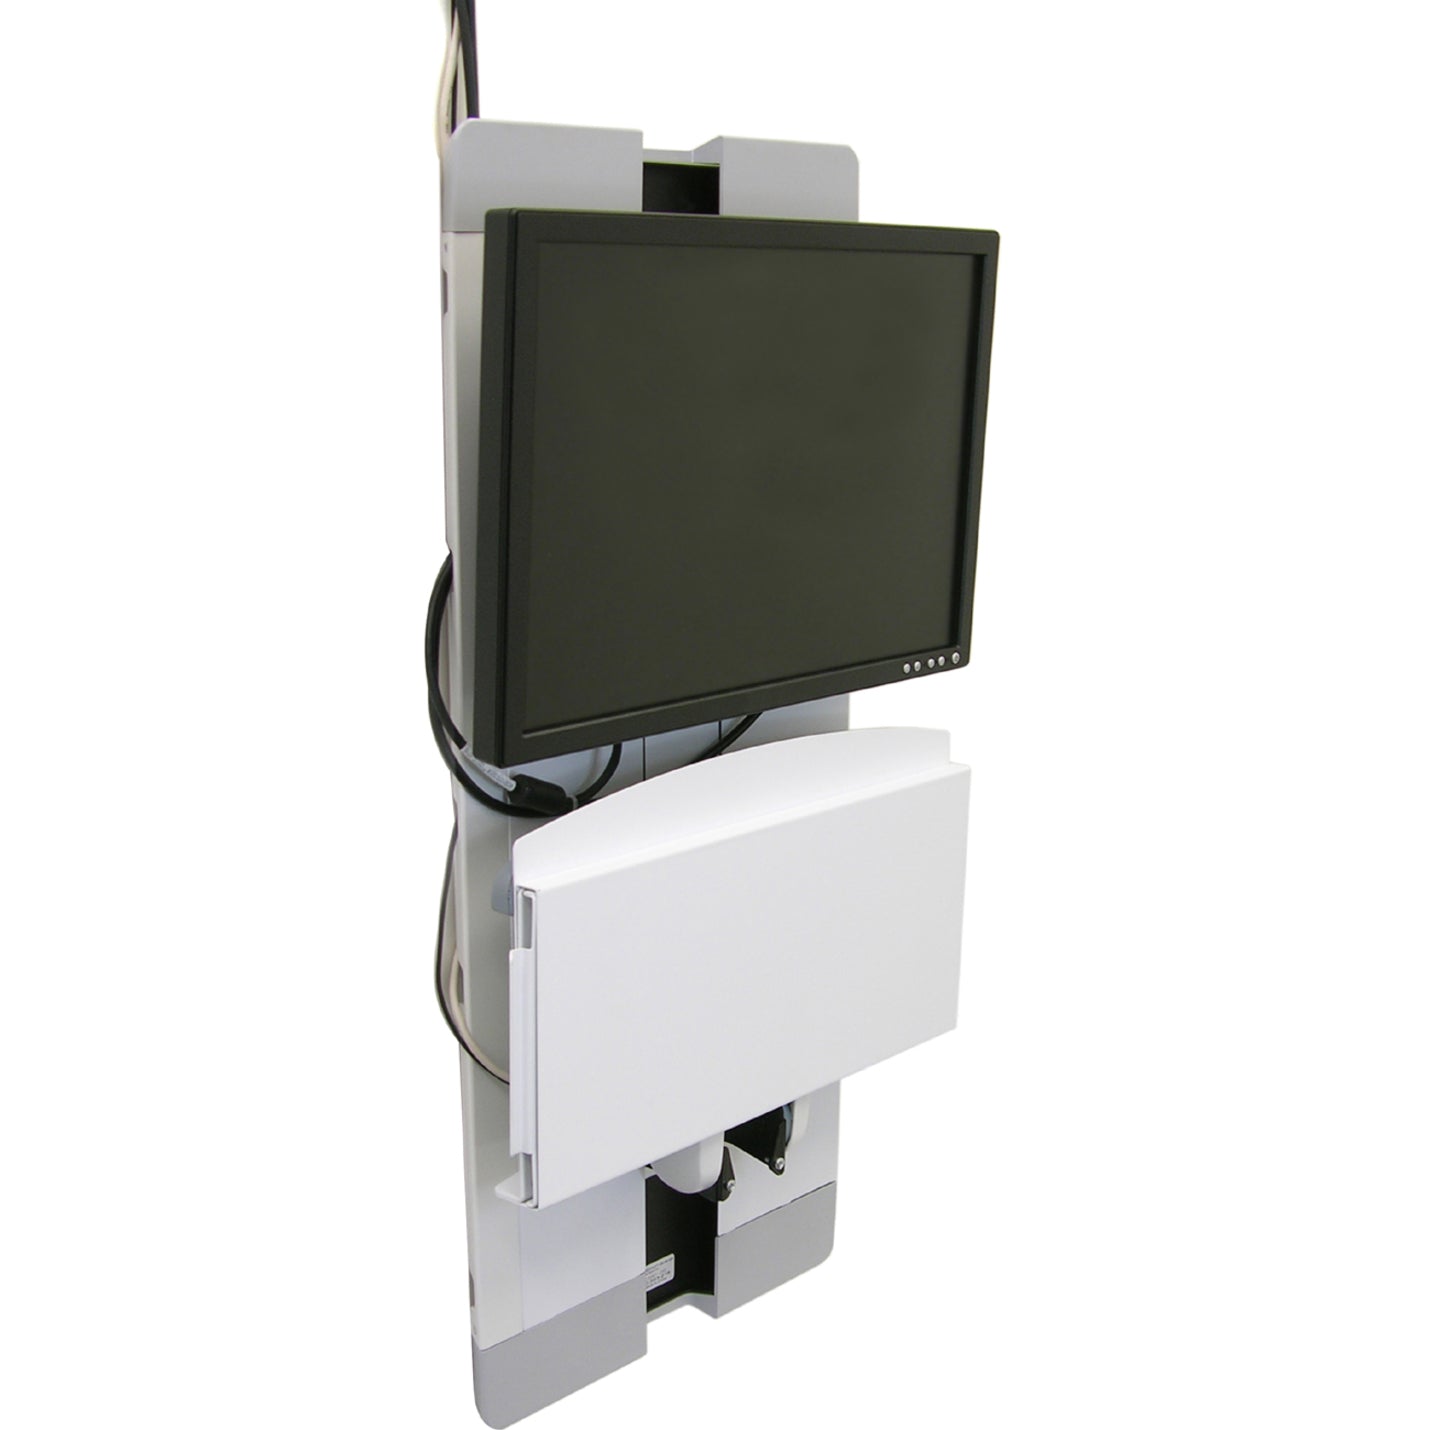 Ergotron 60-593-216 StyleView Vertical Lift for Flat Panel Display, White